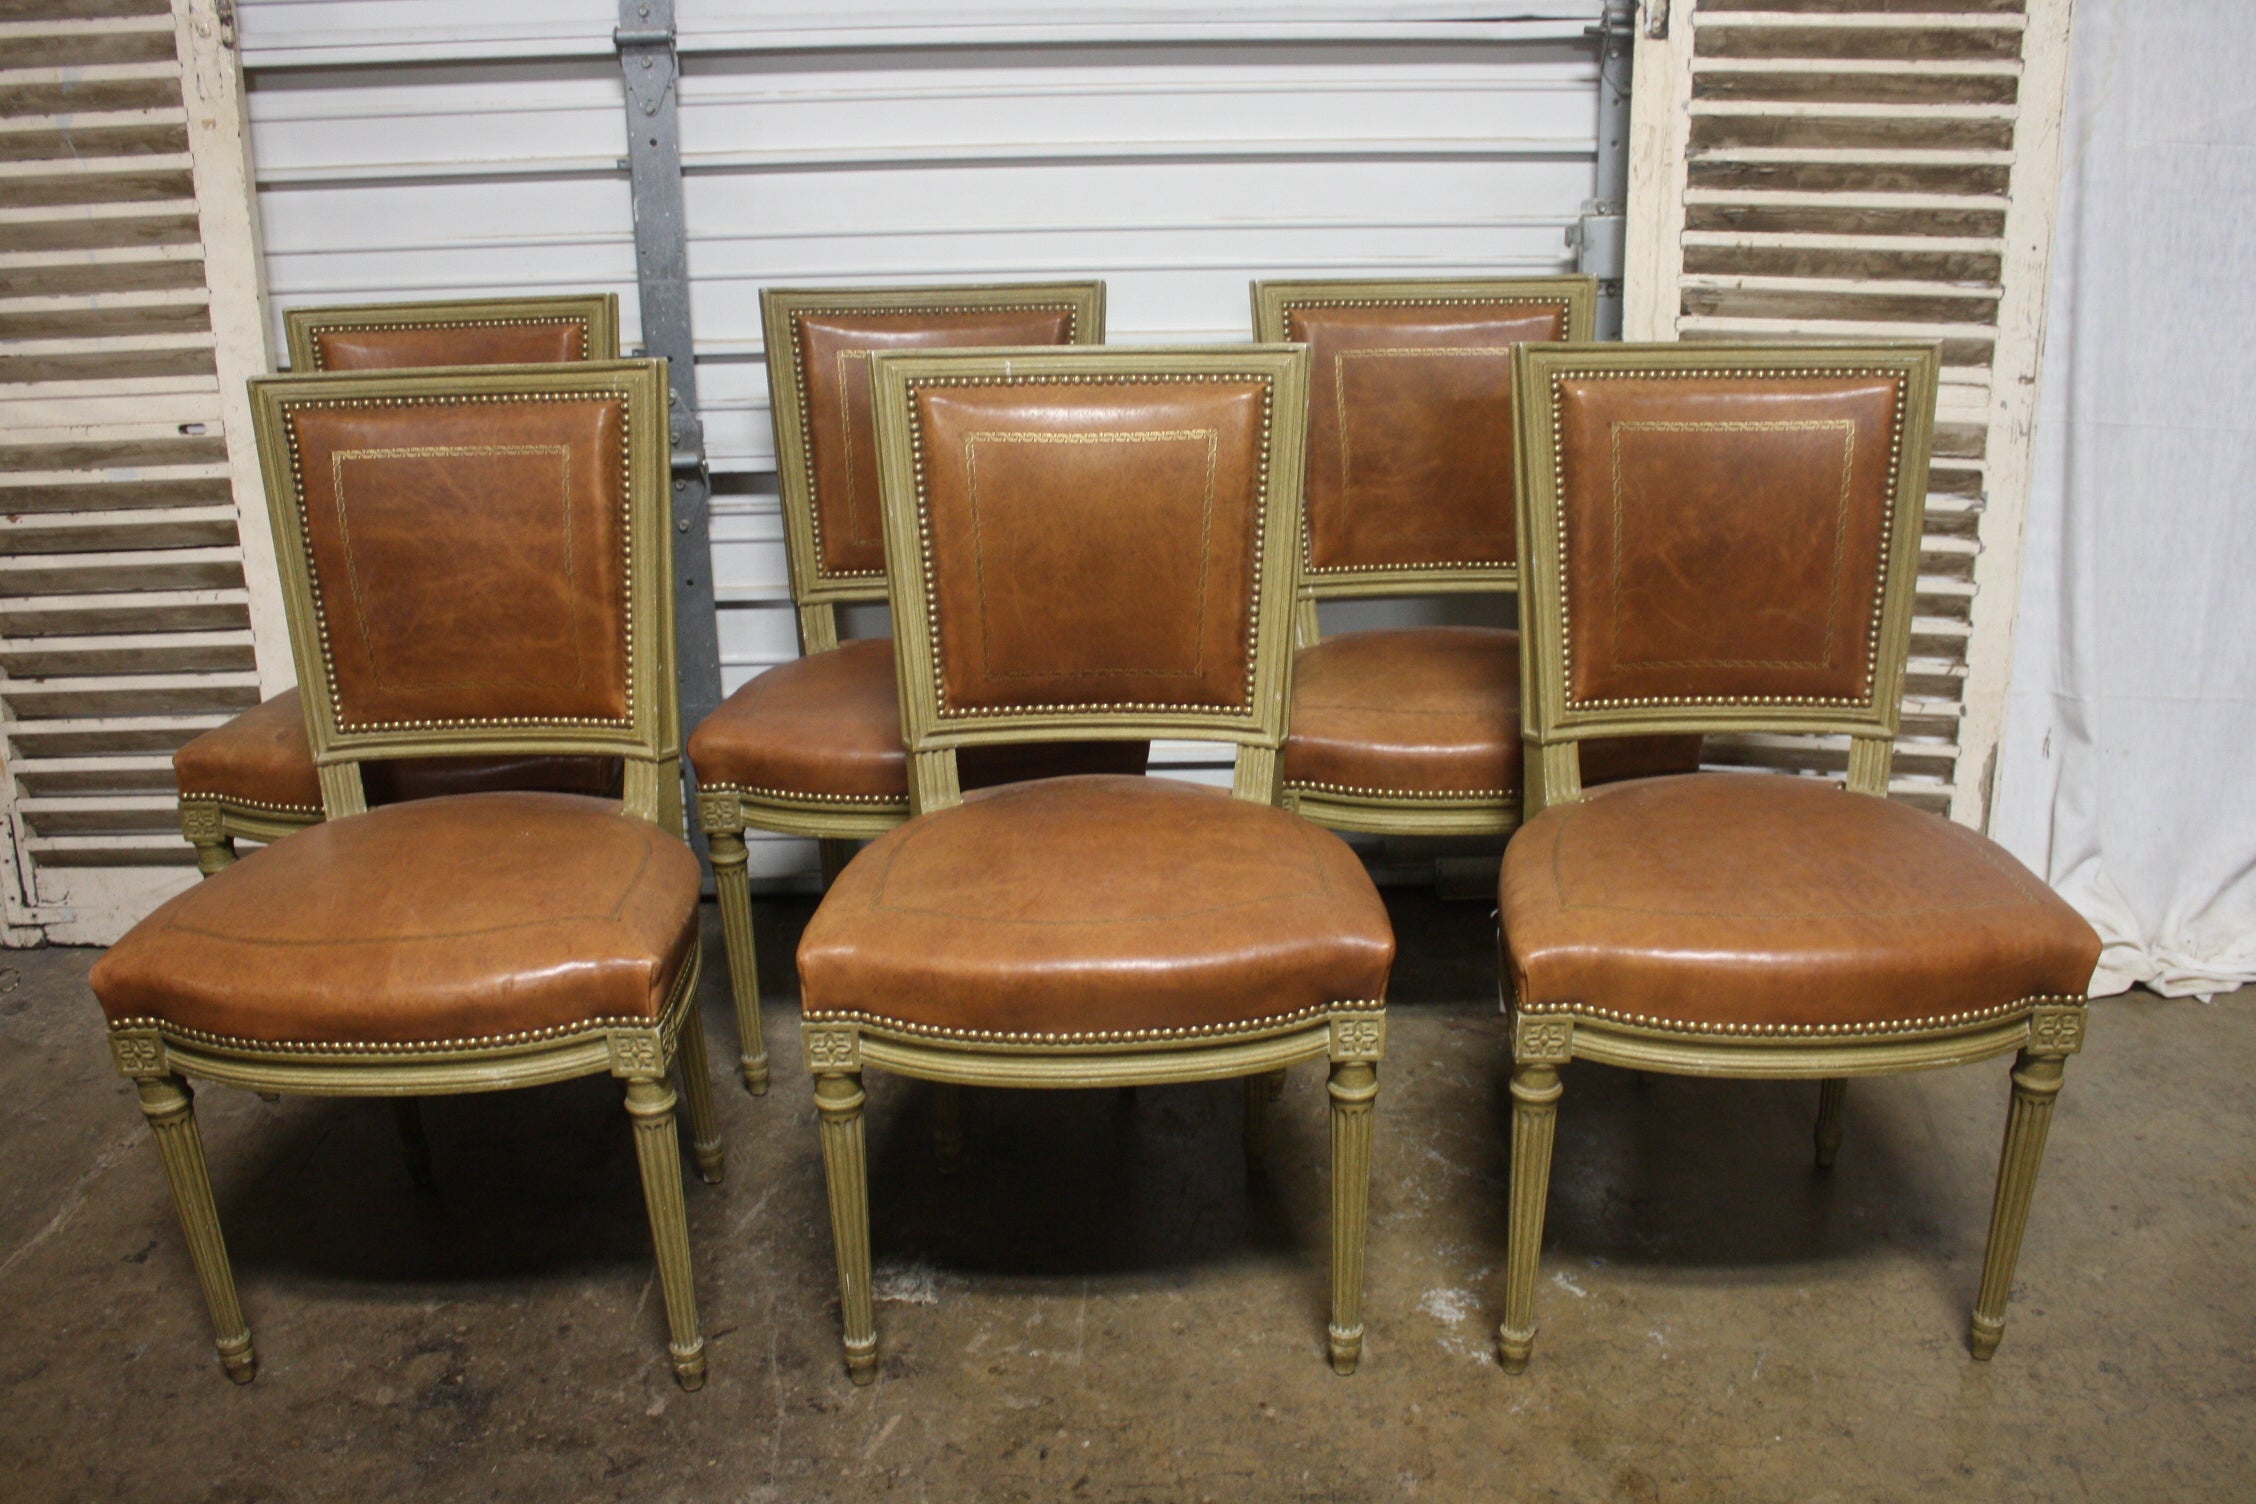 Beautiful set of 6 dining room chairs signed Gouffe a Paris. The chairs are covered of leather and painted. Very Chic and so much quality.